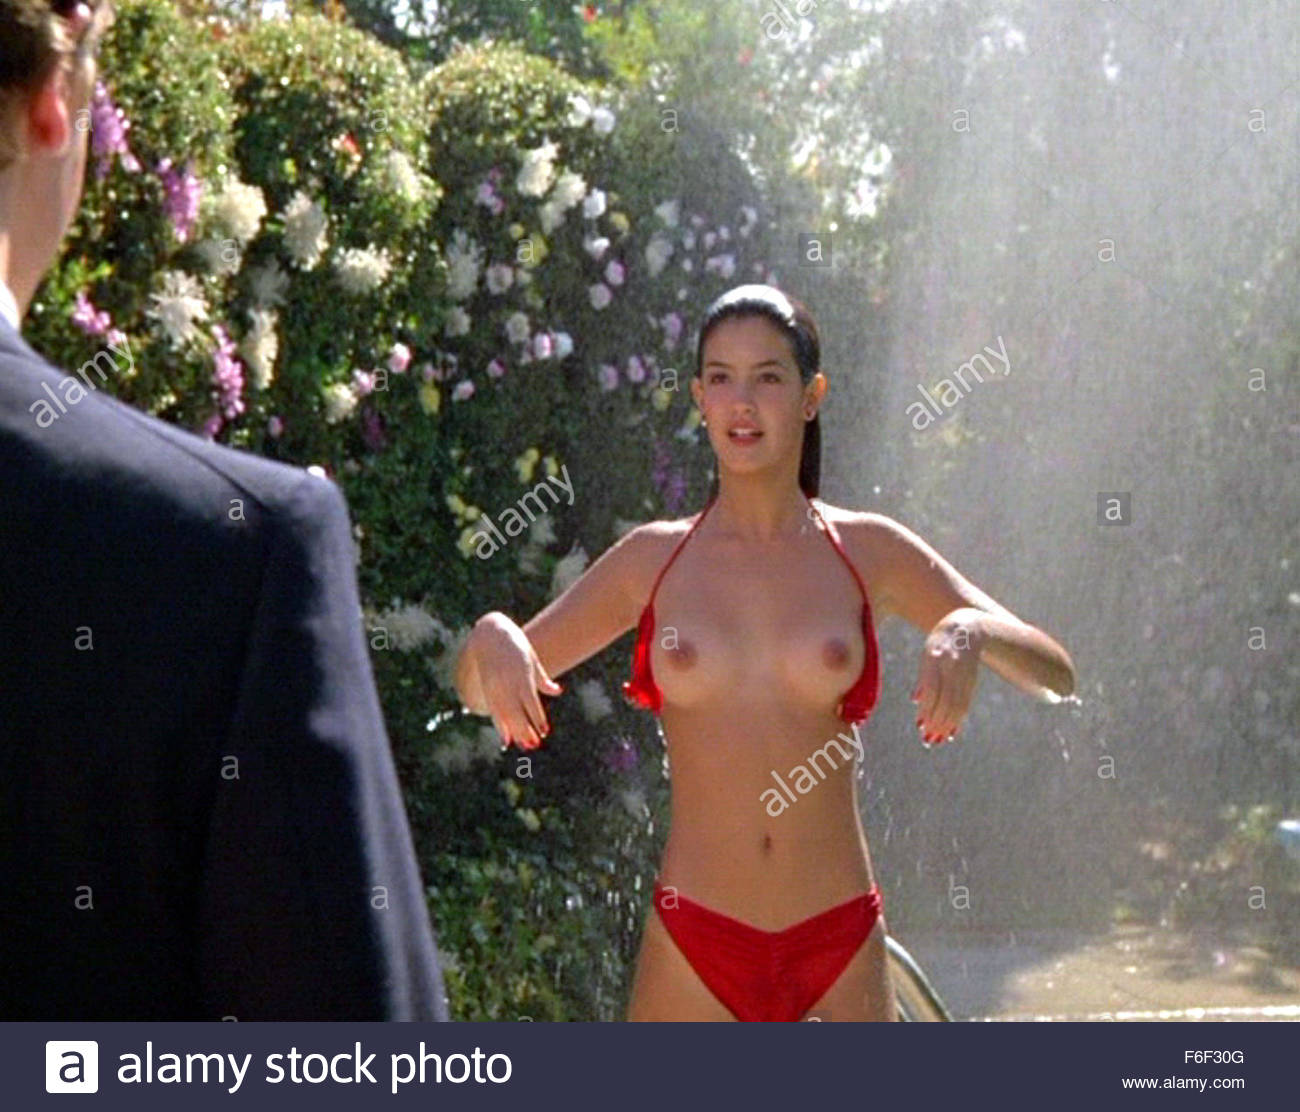 Phoebe Cates Topless Pictures. 